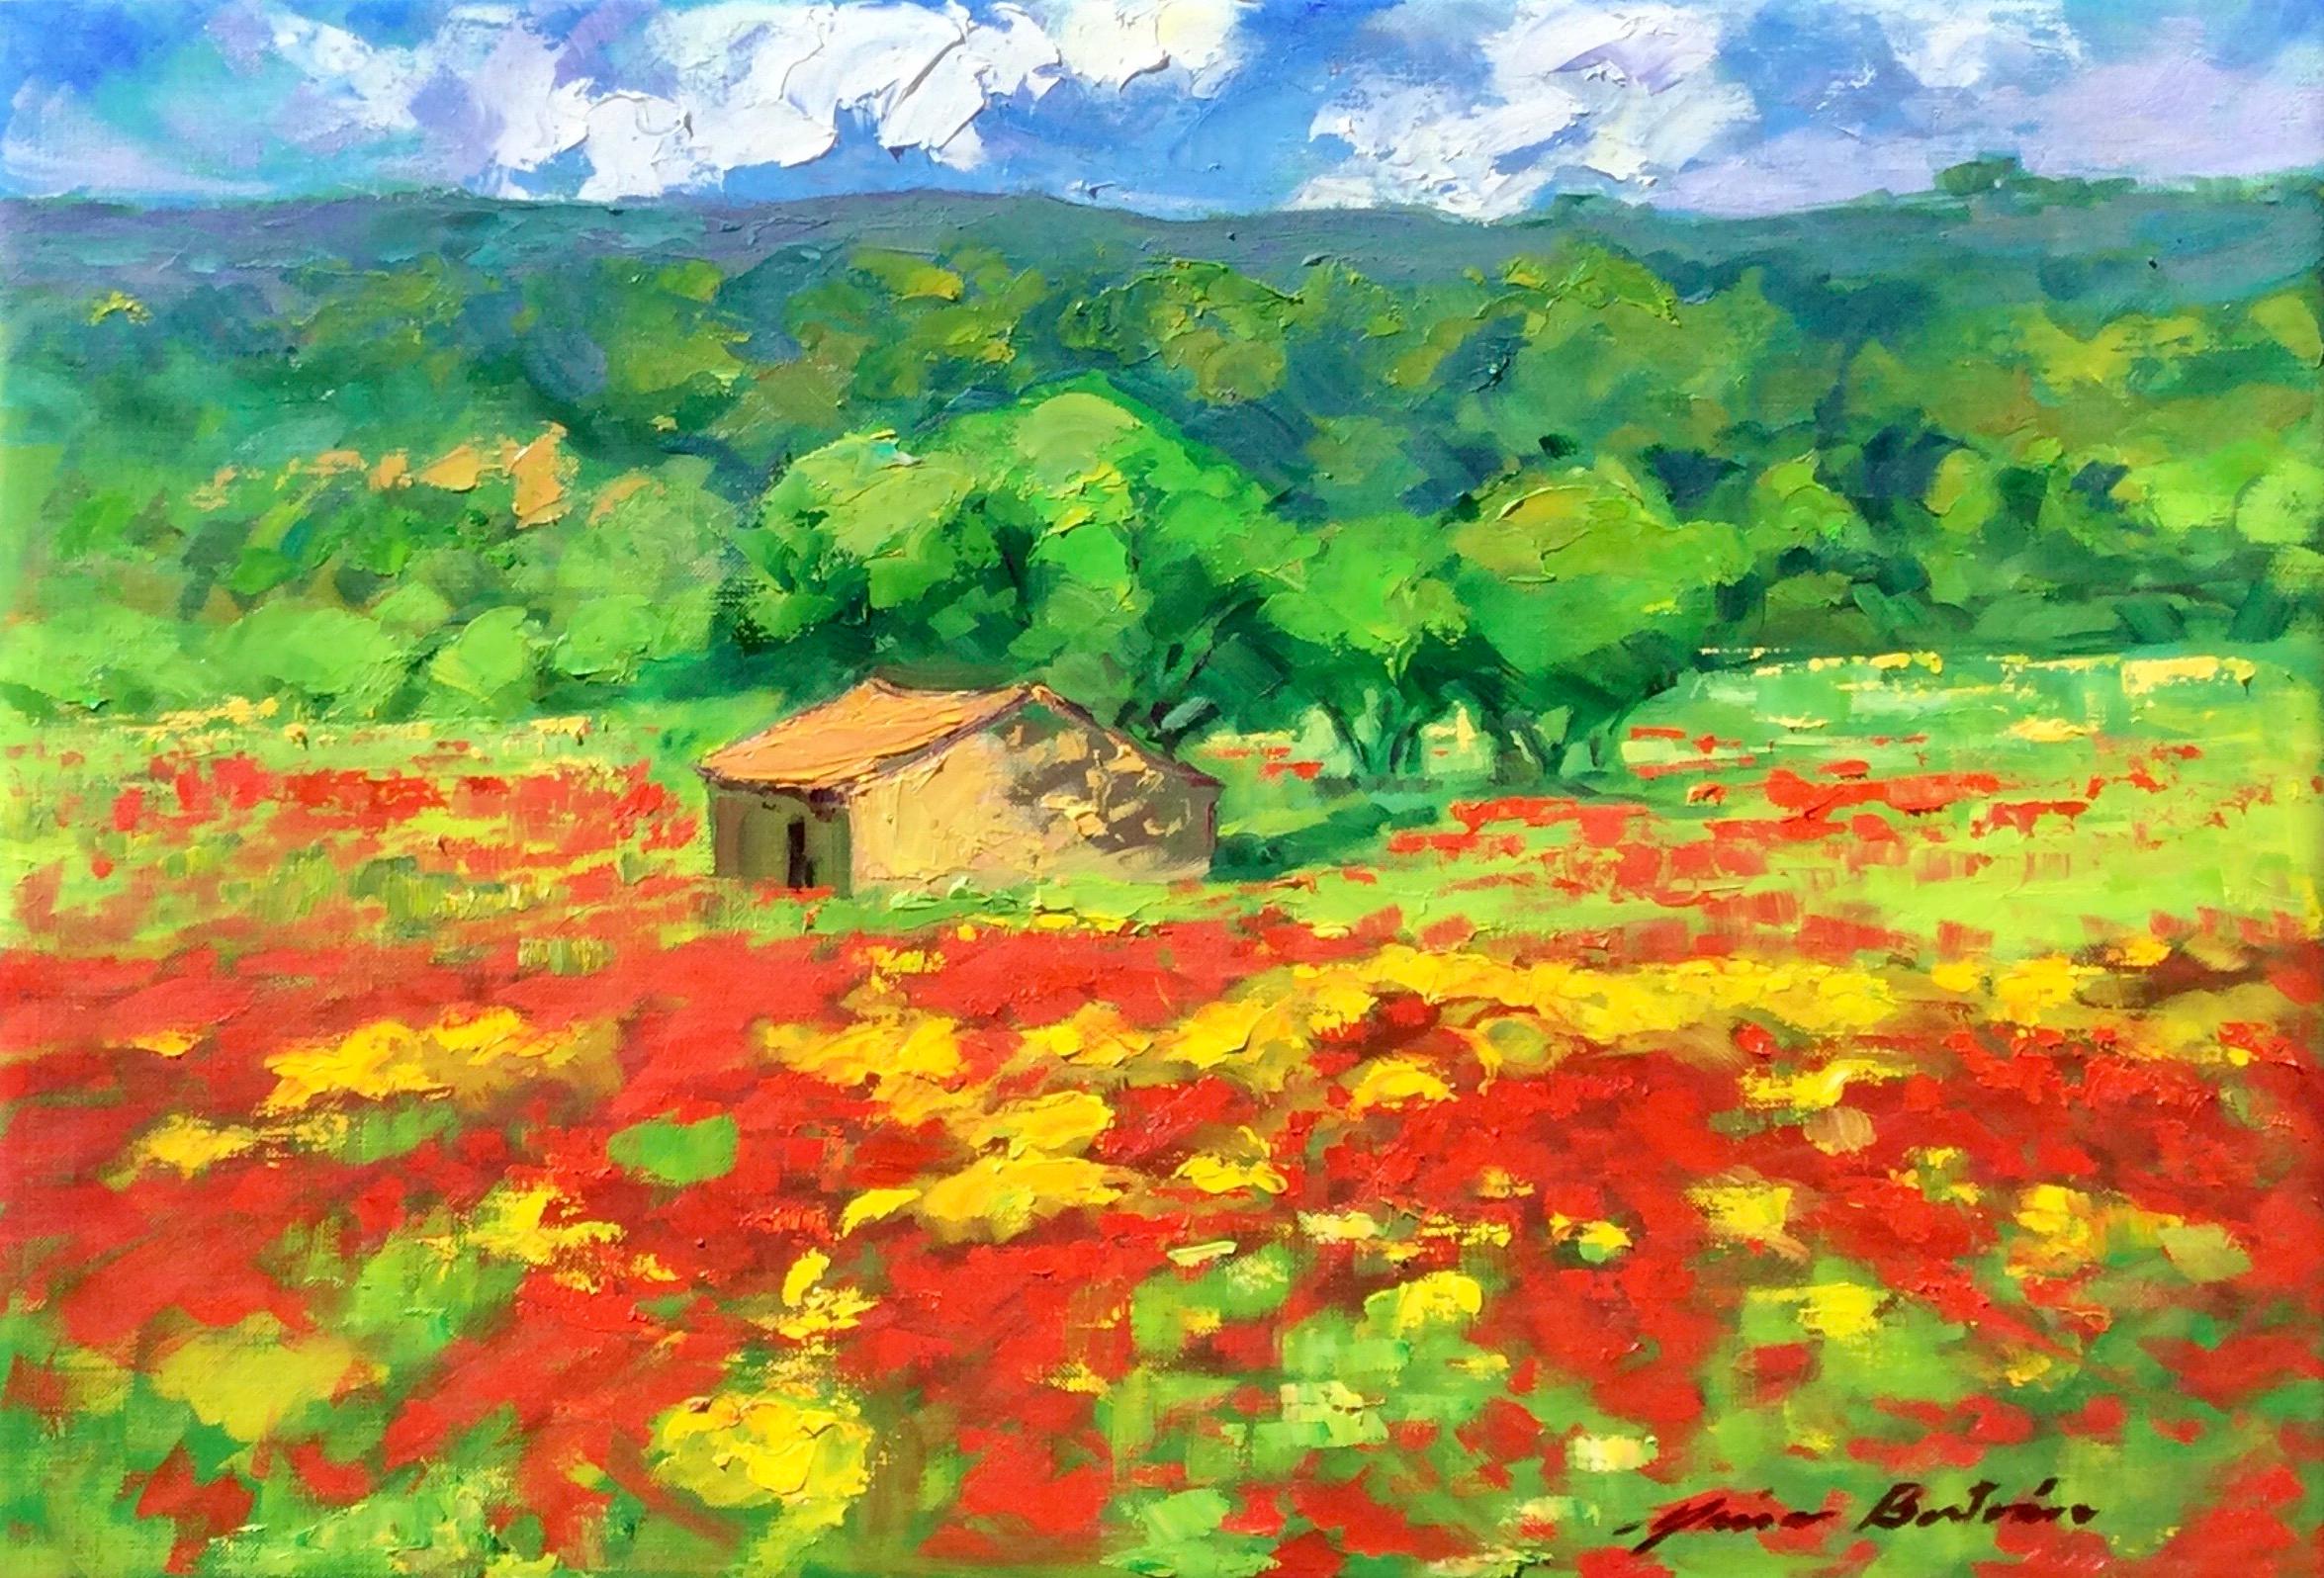 Landscape Painting Maria Bertrán - "The Wild Poppies By The Cabanon" Huile impressionniste contemporaine de Provence